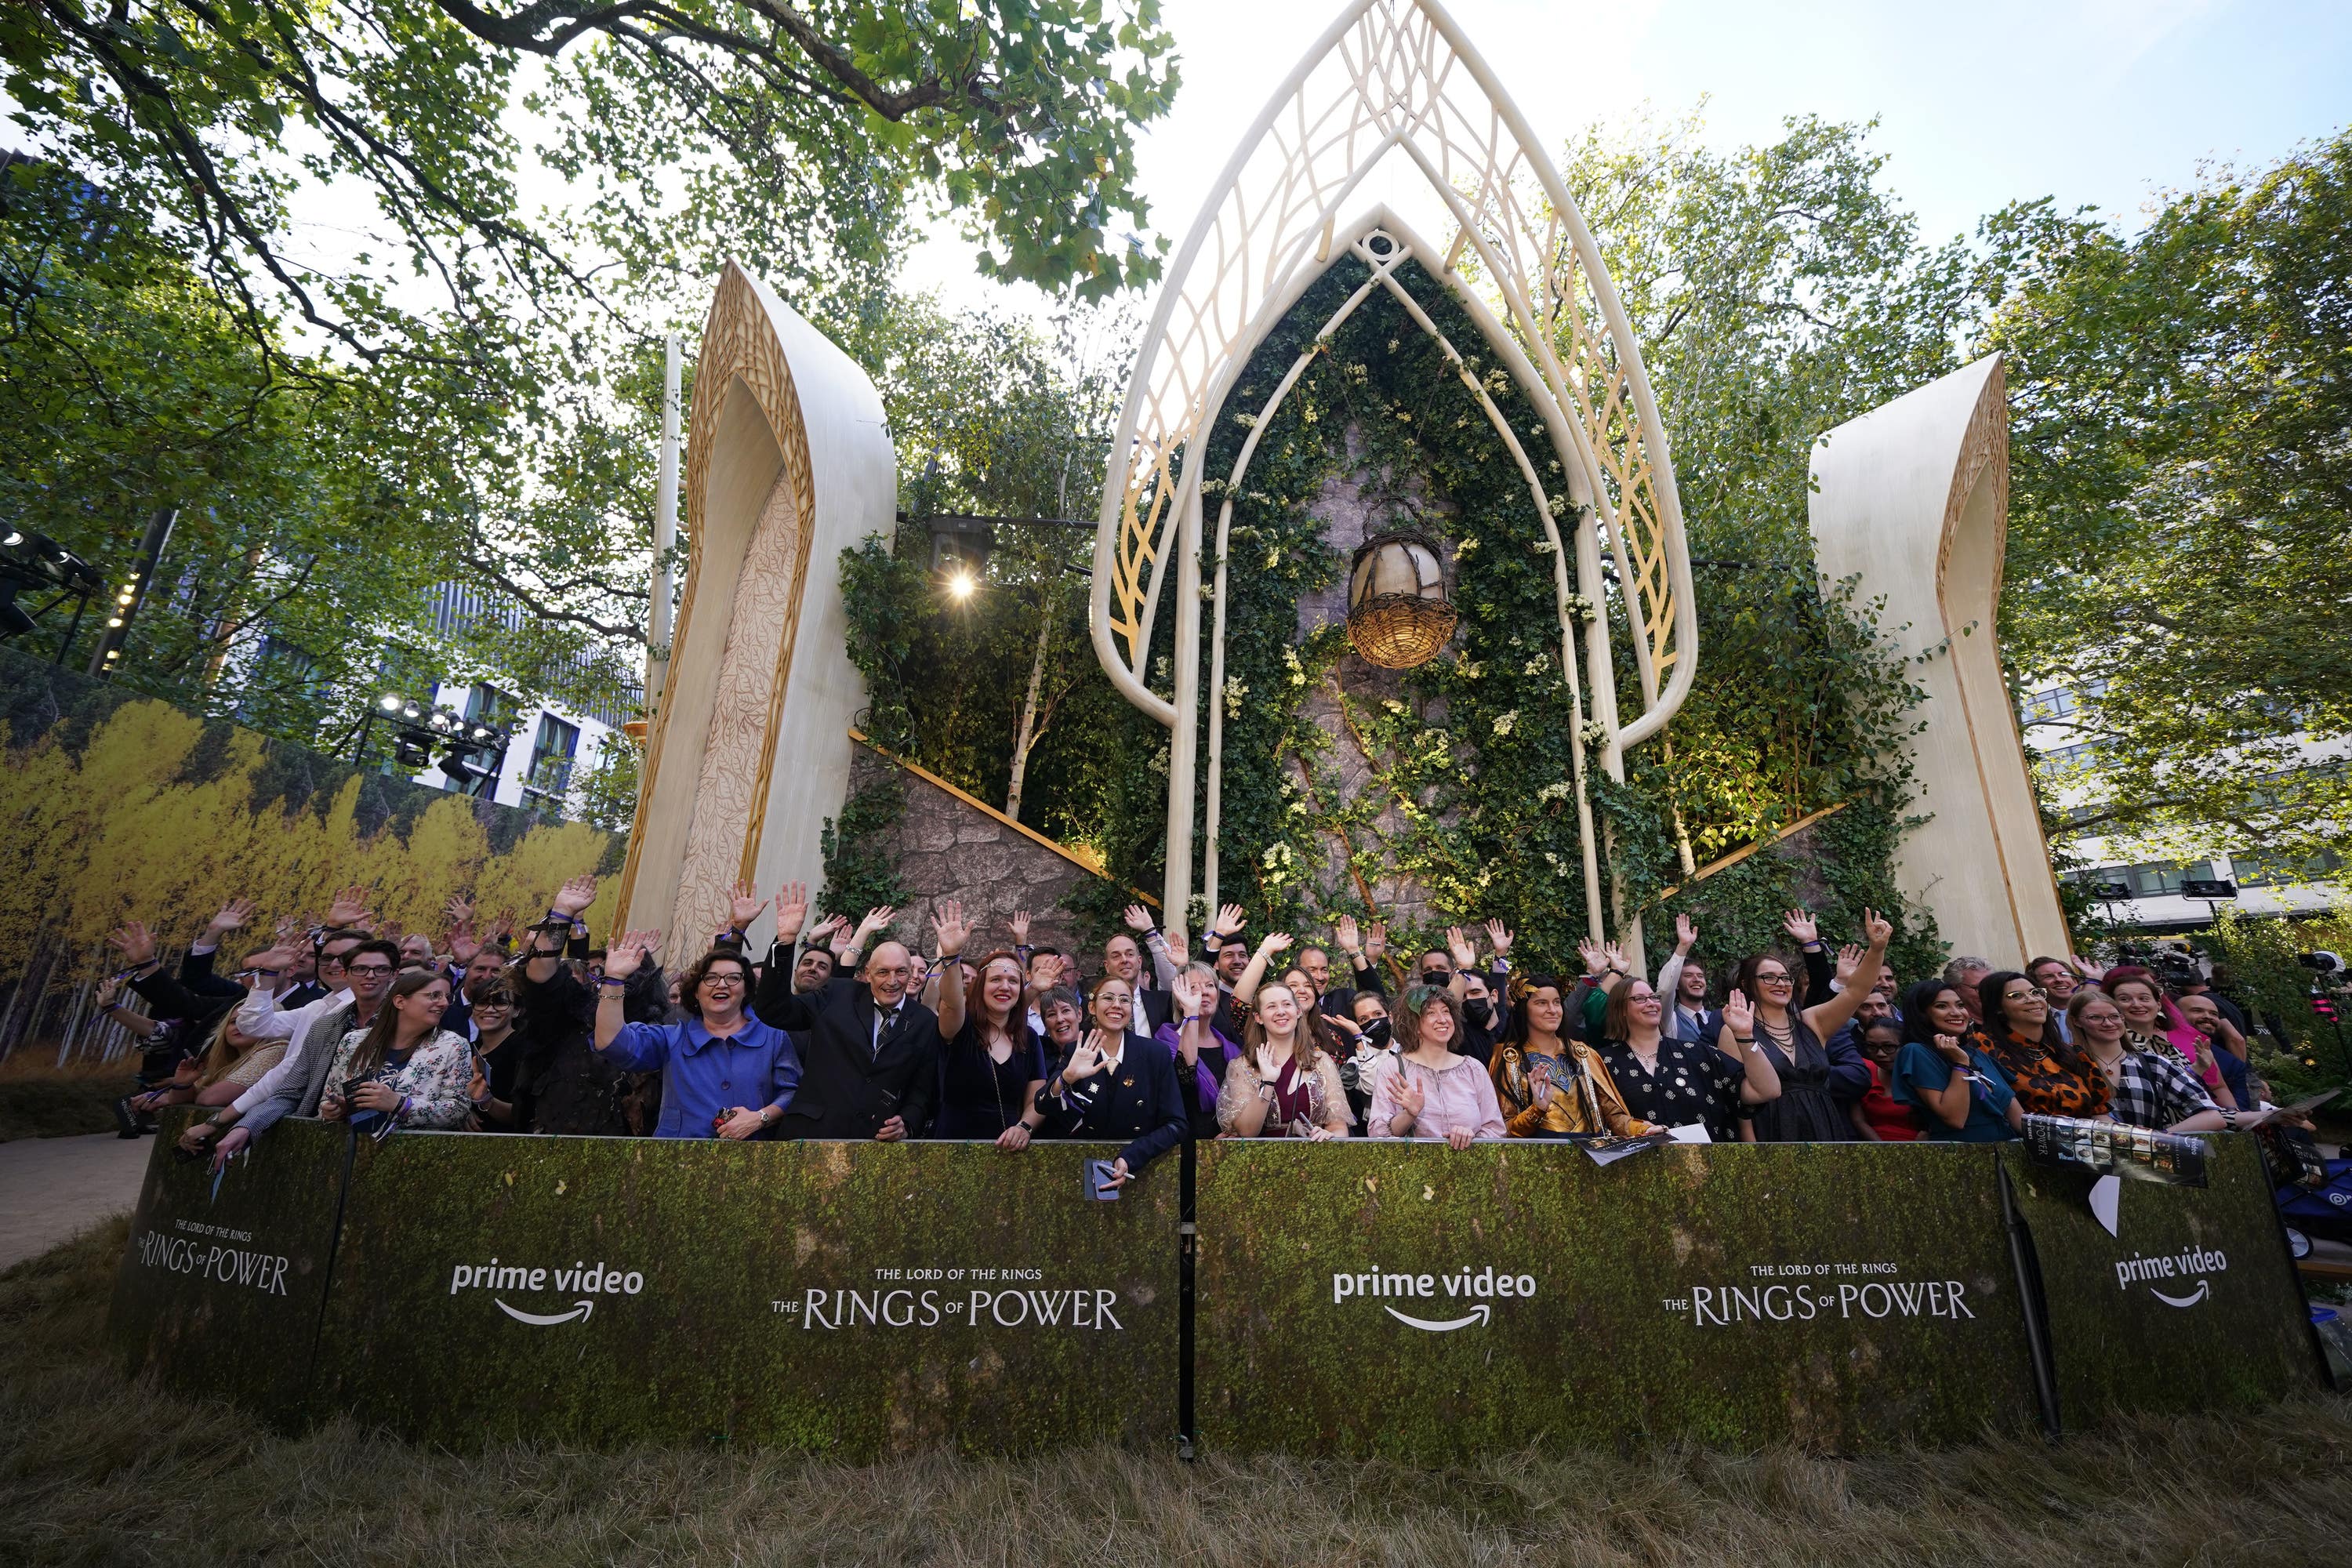 A general view of fans at the global premiere of The Lord of the Rings: The Rings Of Power in August.